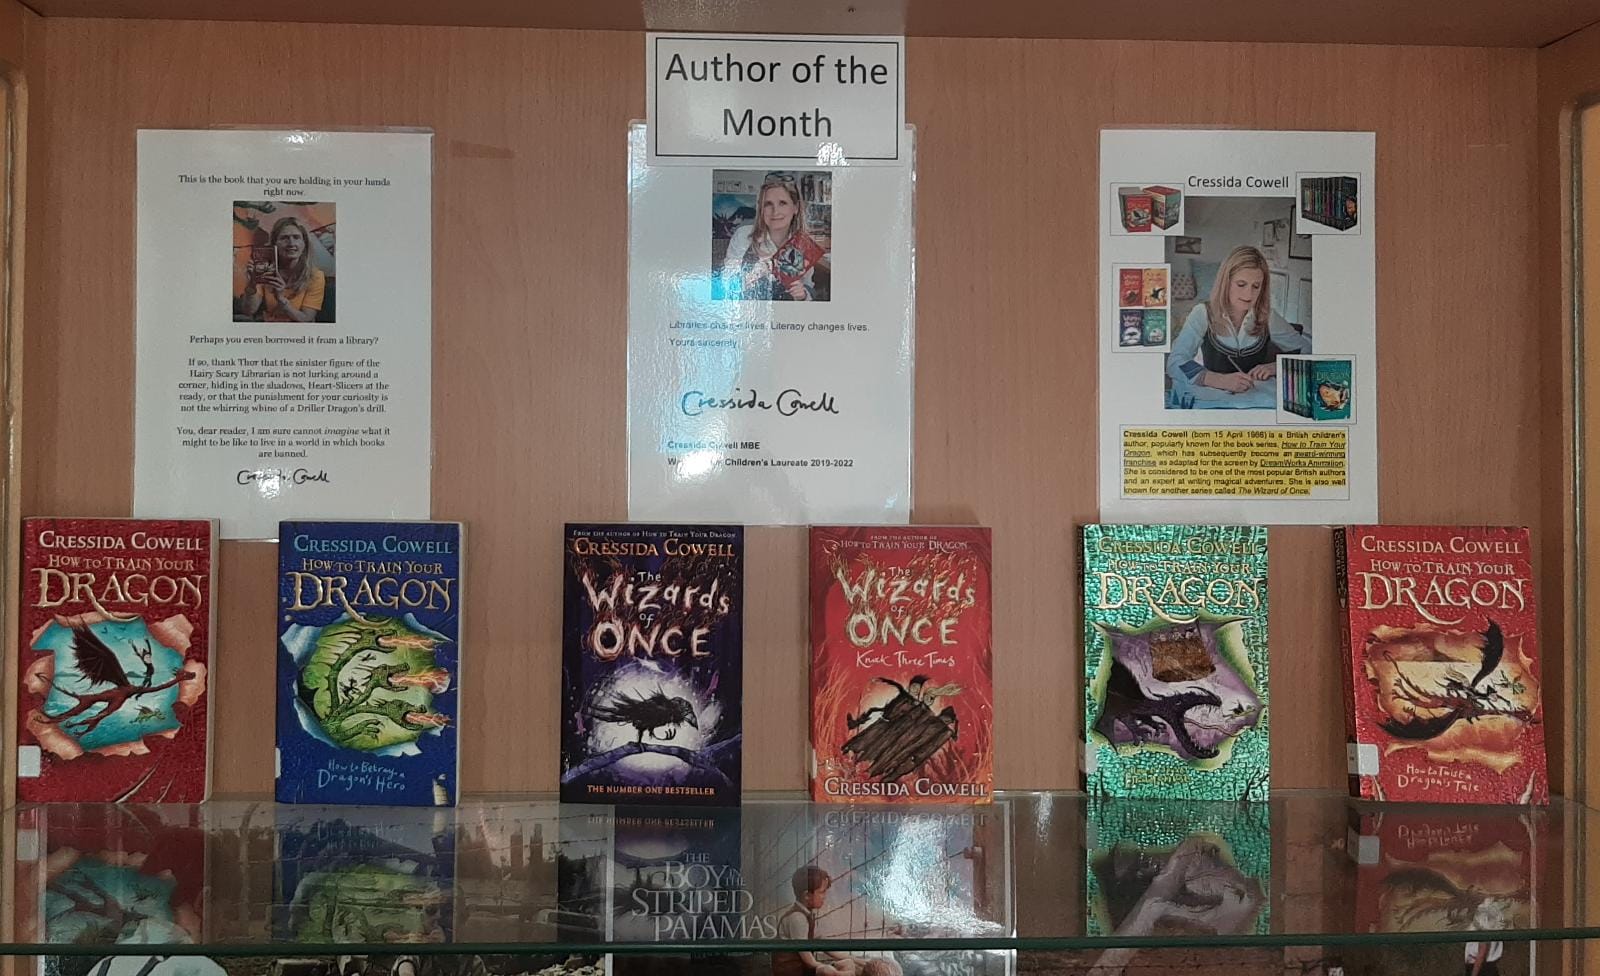 Author of the Month - Cressida Cowell 1